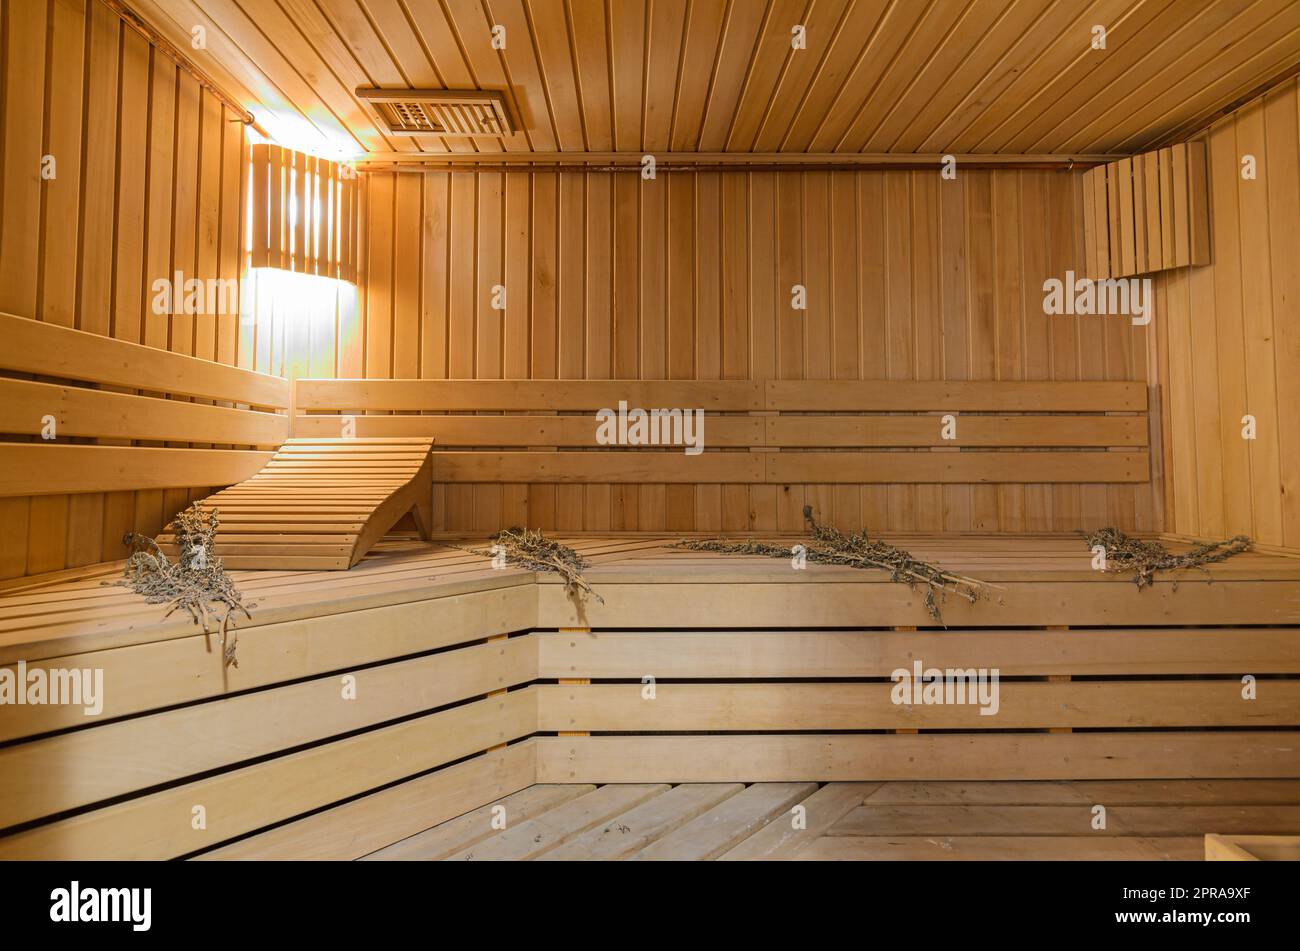 The interior of the bath in a private house Stock Photo